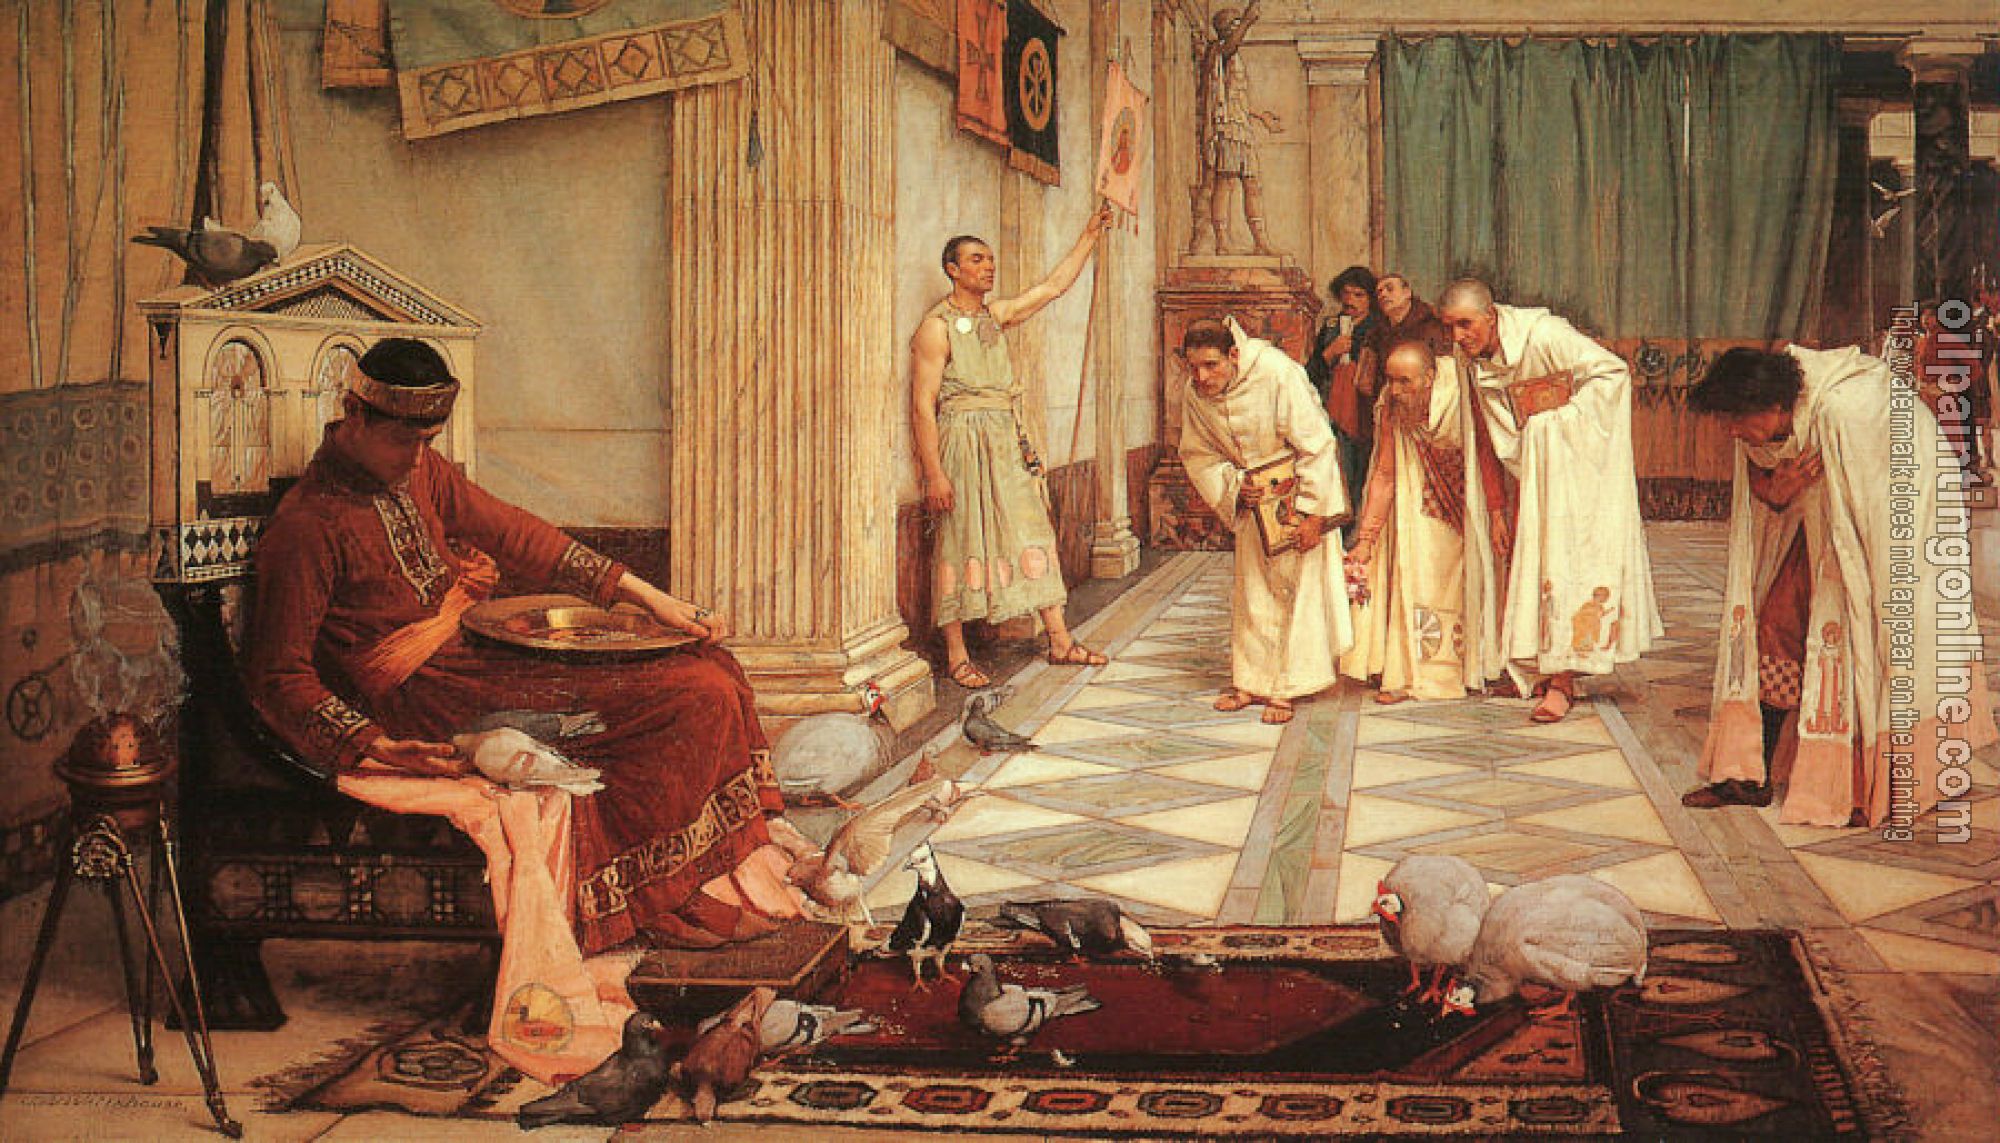 Waterhouse, John William - The Favourites of the Emperor Honorious